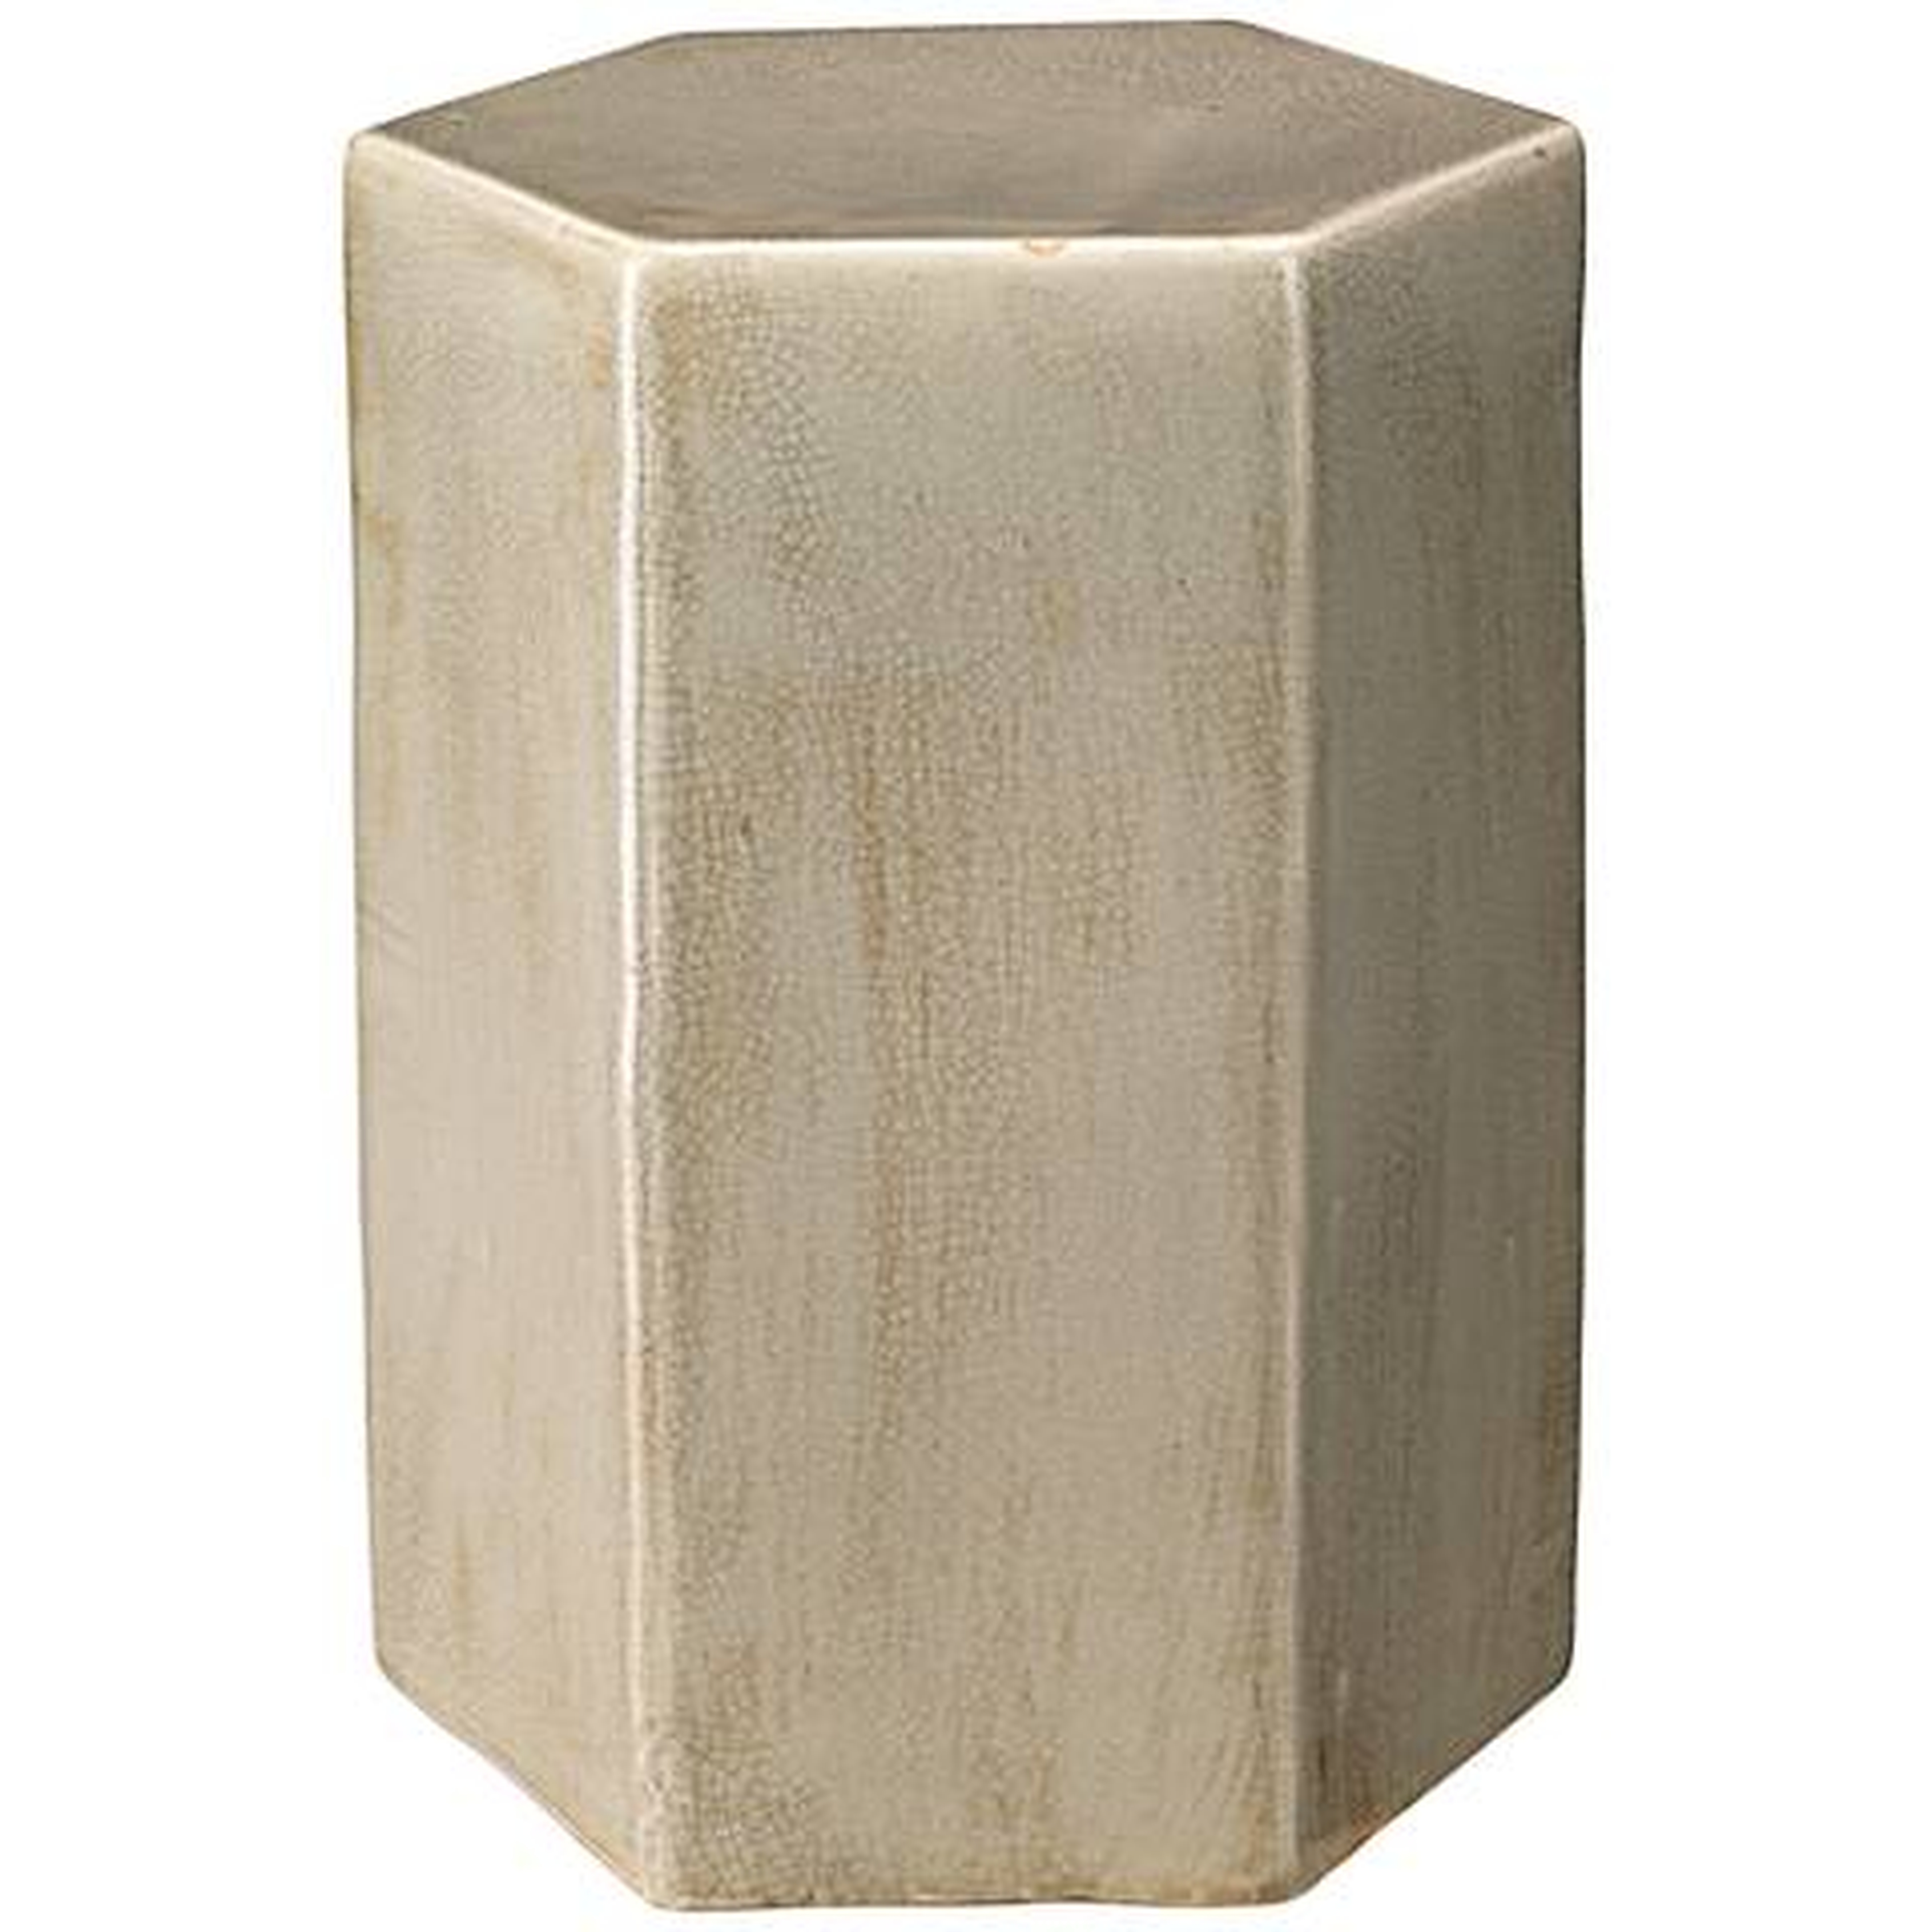 Jamie Young Porto Small Pistachio Ceramic Side Table and, 1 - Lamps Plus